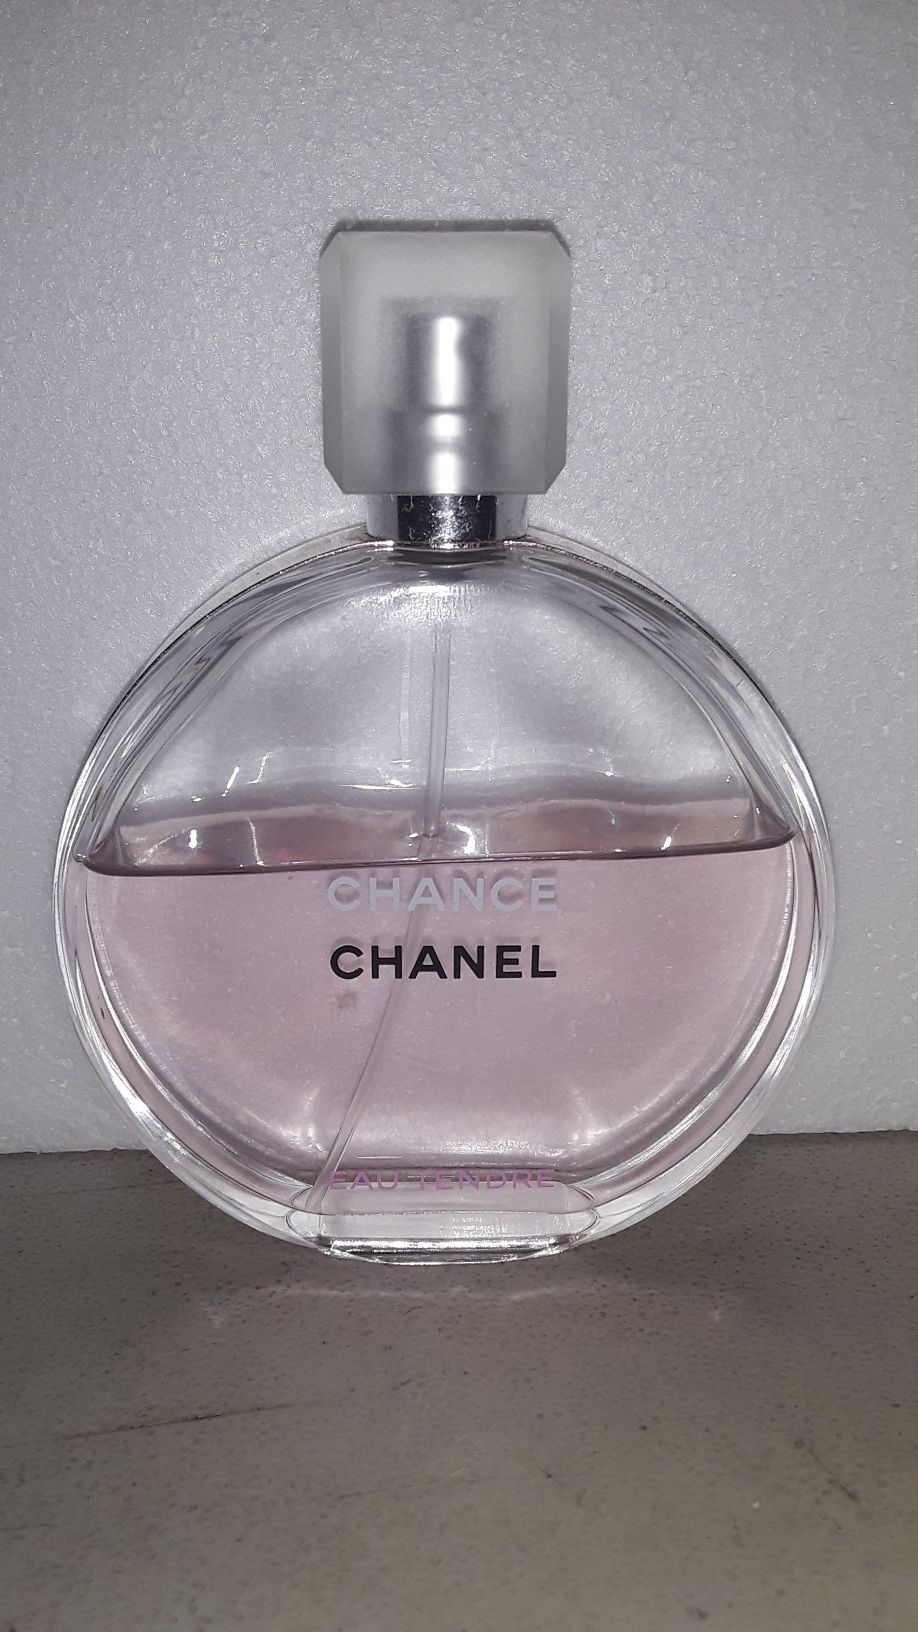 Chance Chanel Perfume for $40 FIRM PRICE